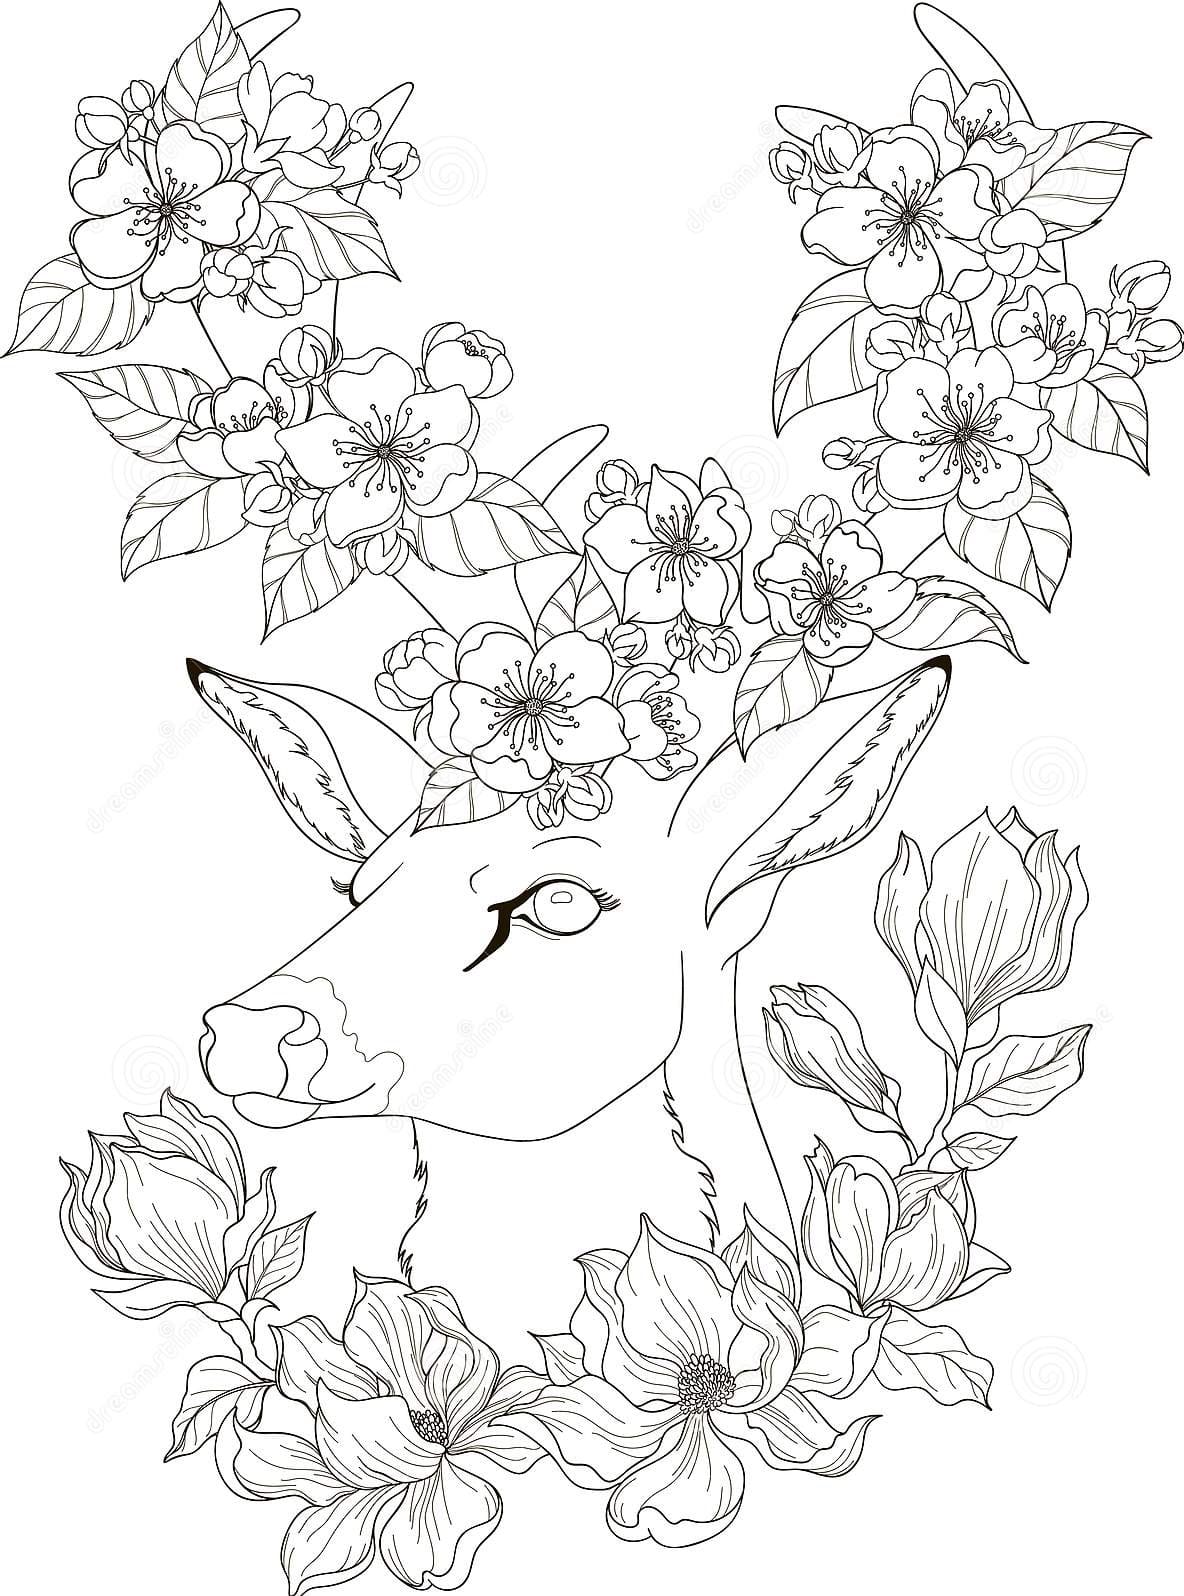 Drawing Deer With Magnolia And Apple Blossom